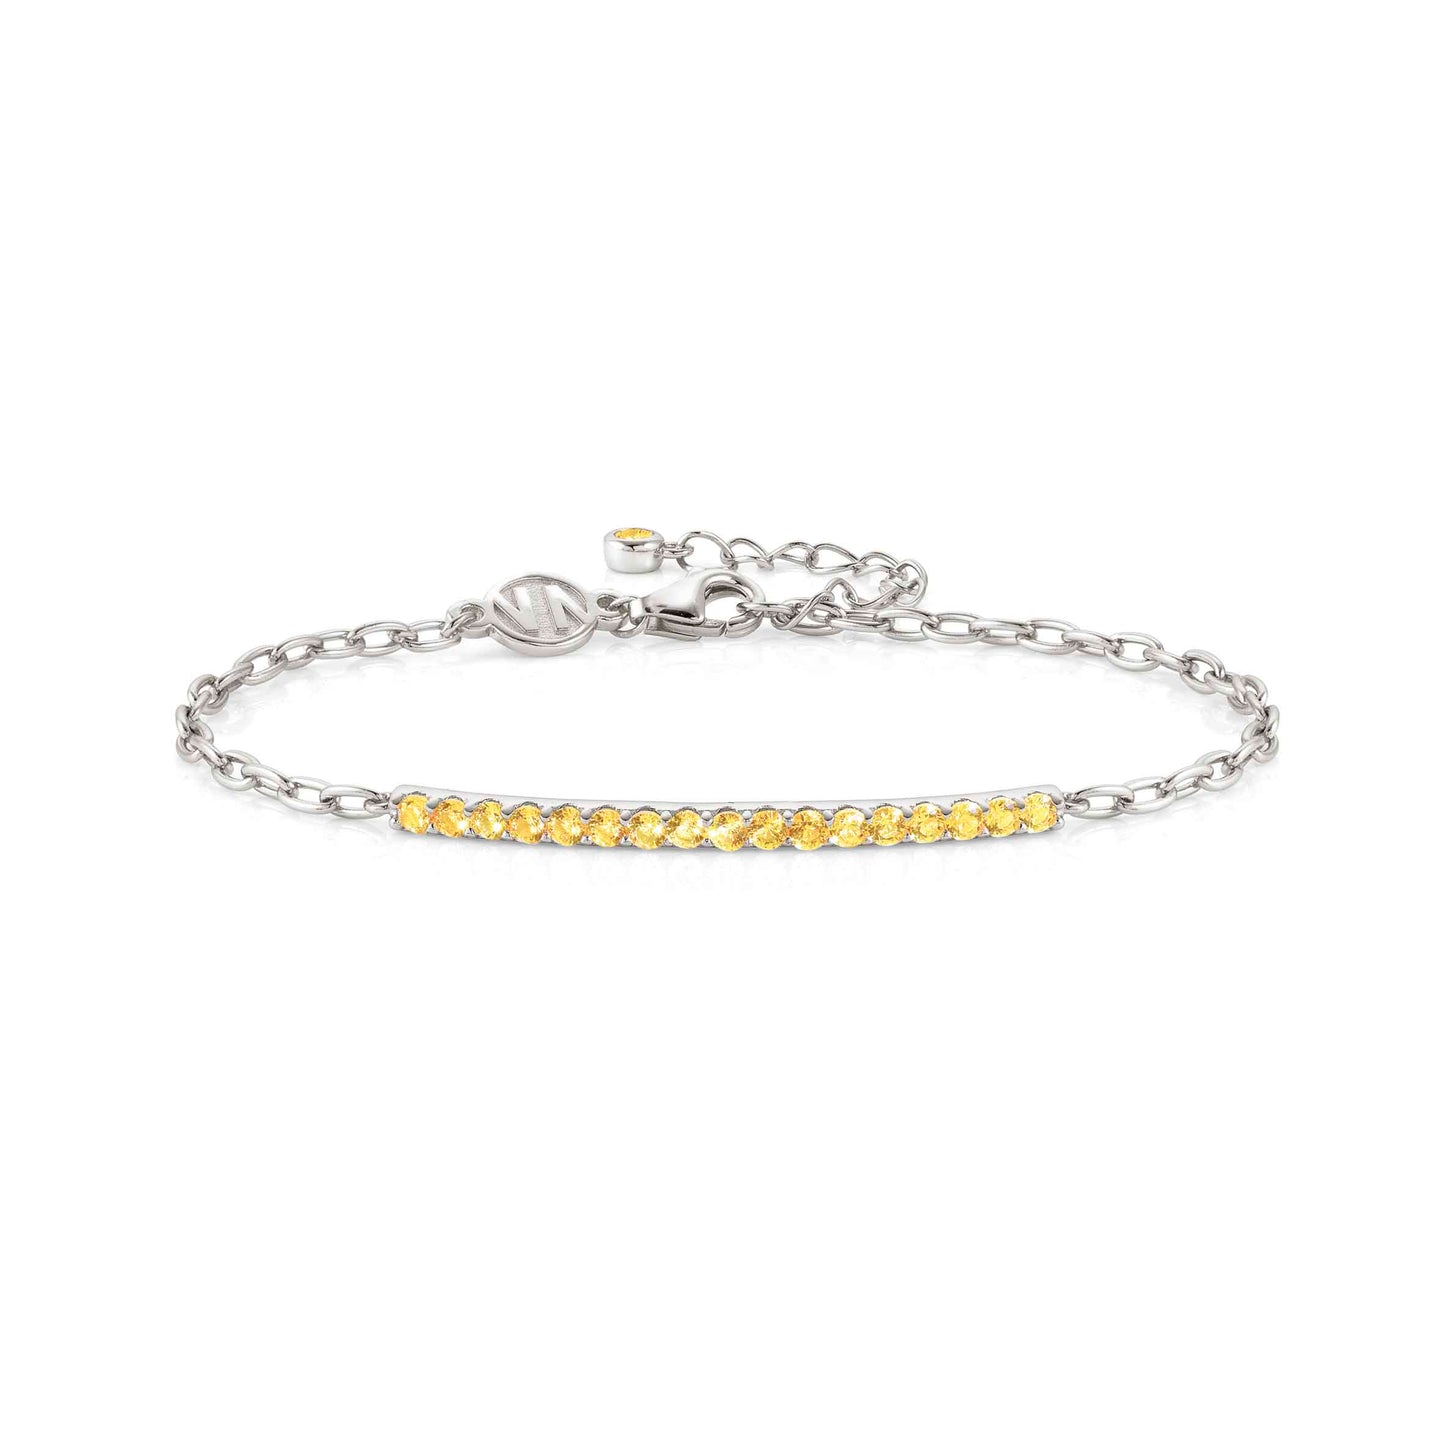 149703/021D LOVELIGHT Sterling Silver Bracelet with YELLOW Cubic Zirconia Stones